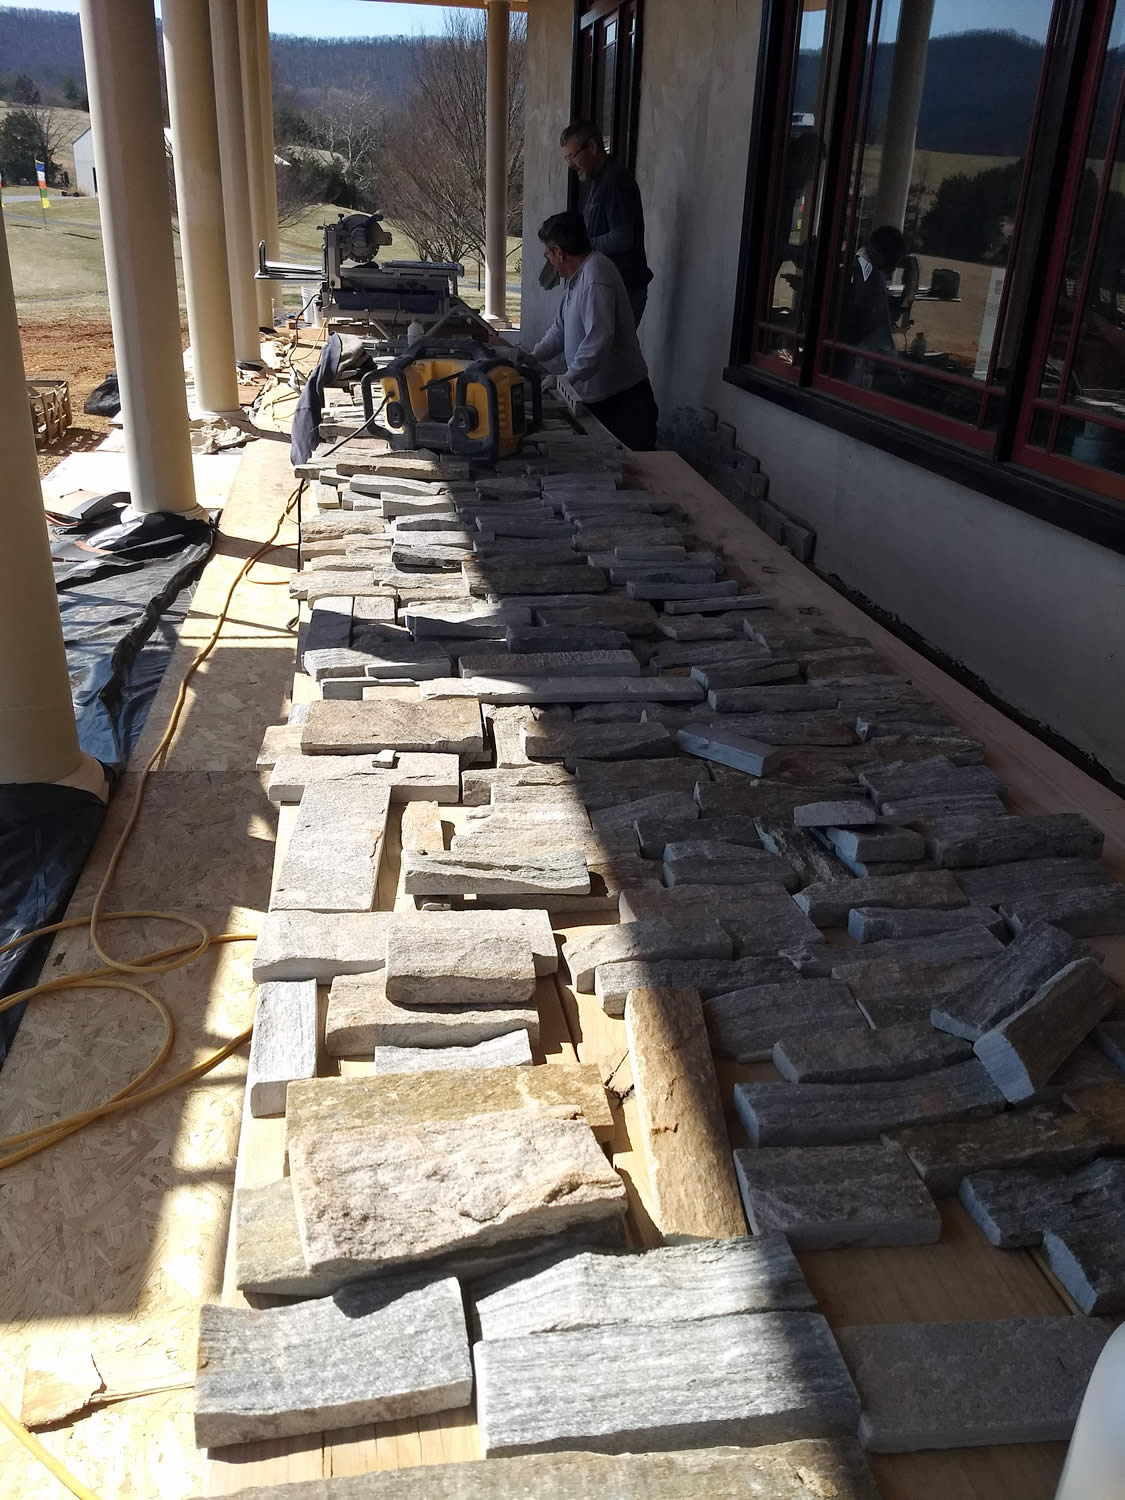 14 March 2019 - Stone work underway on lower south wall.